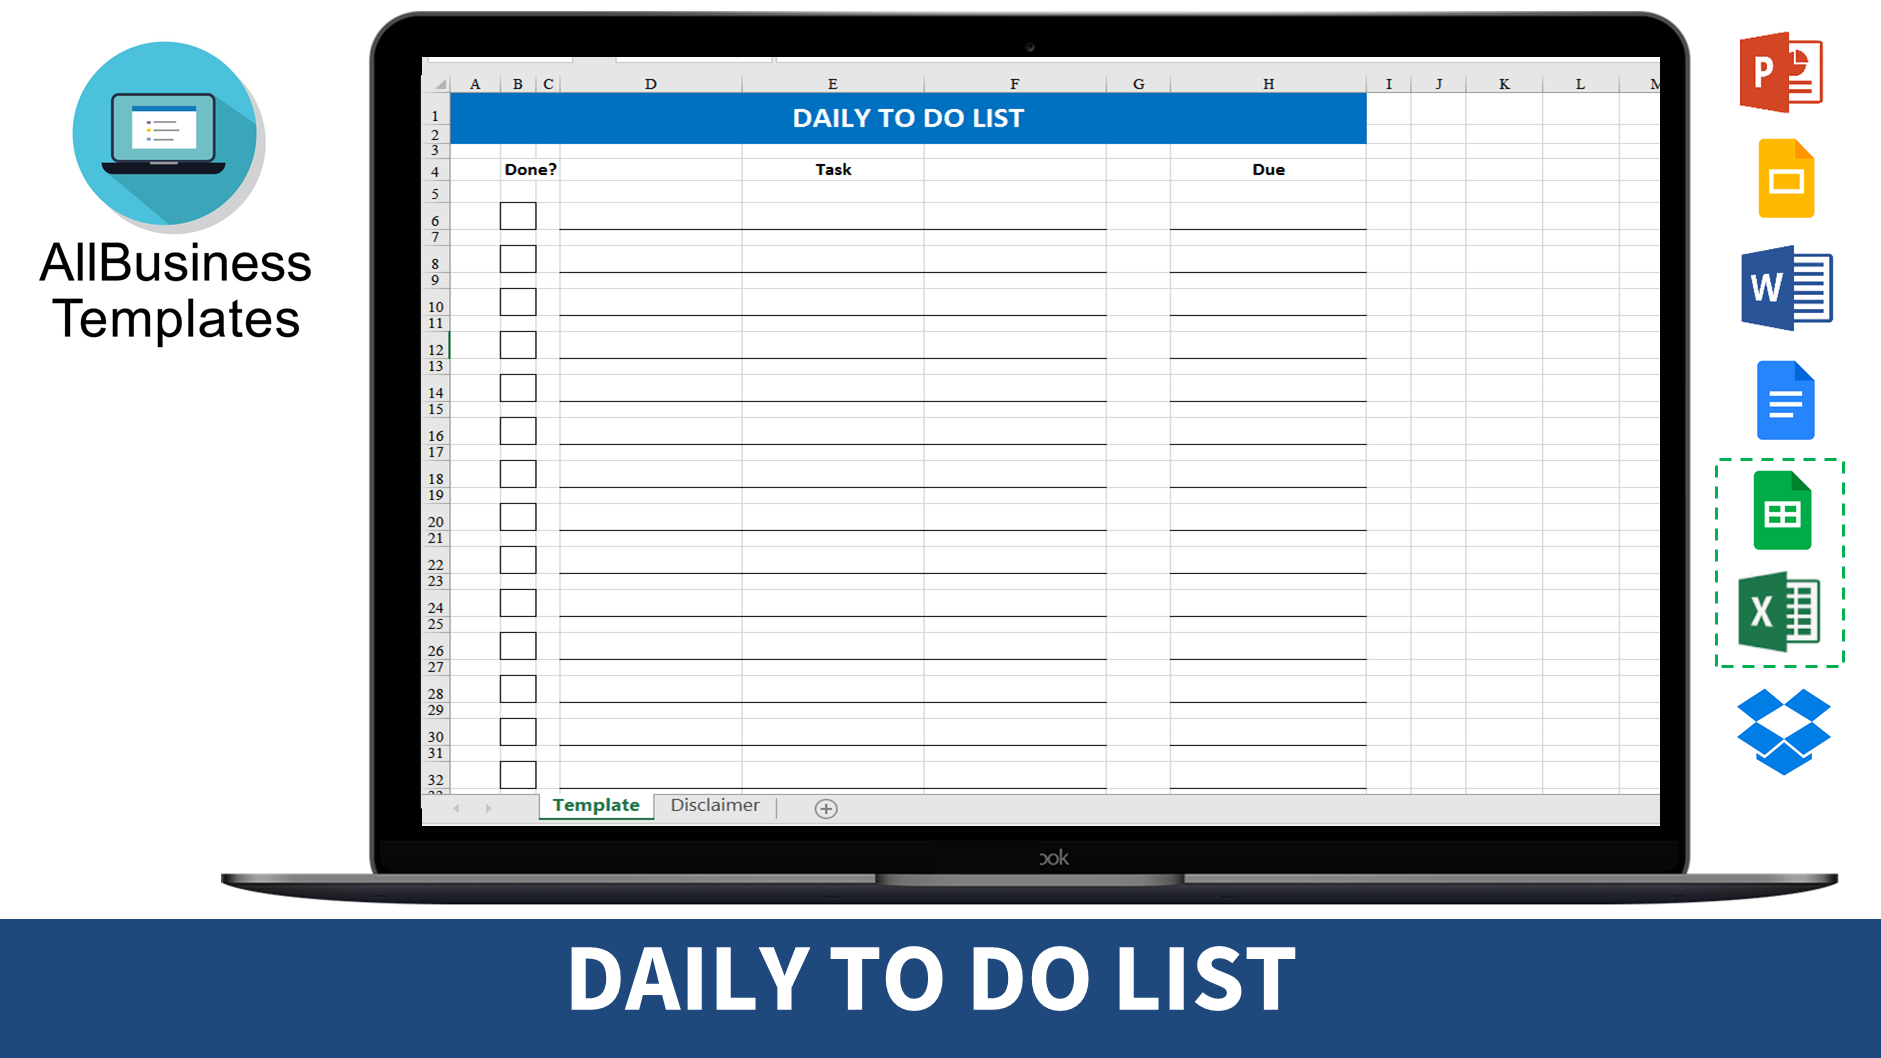 Daily To Do List main image